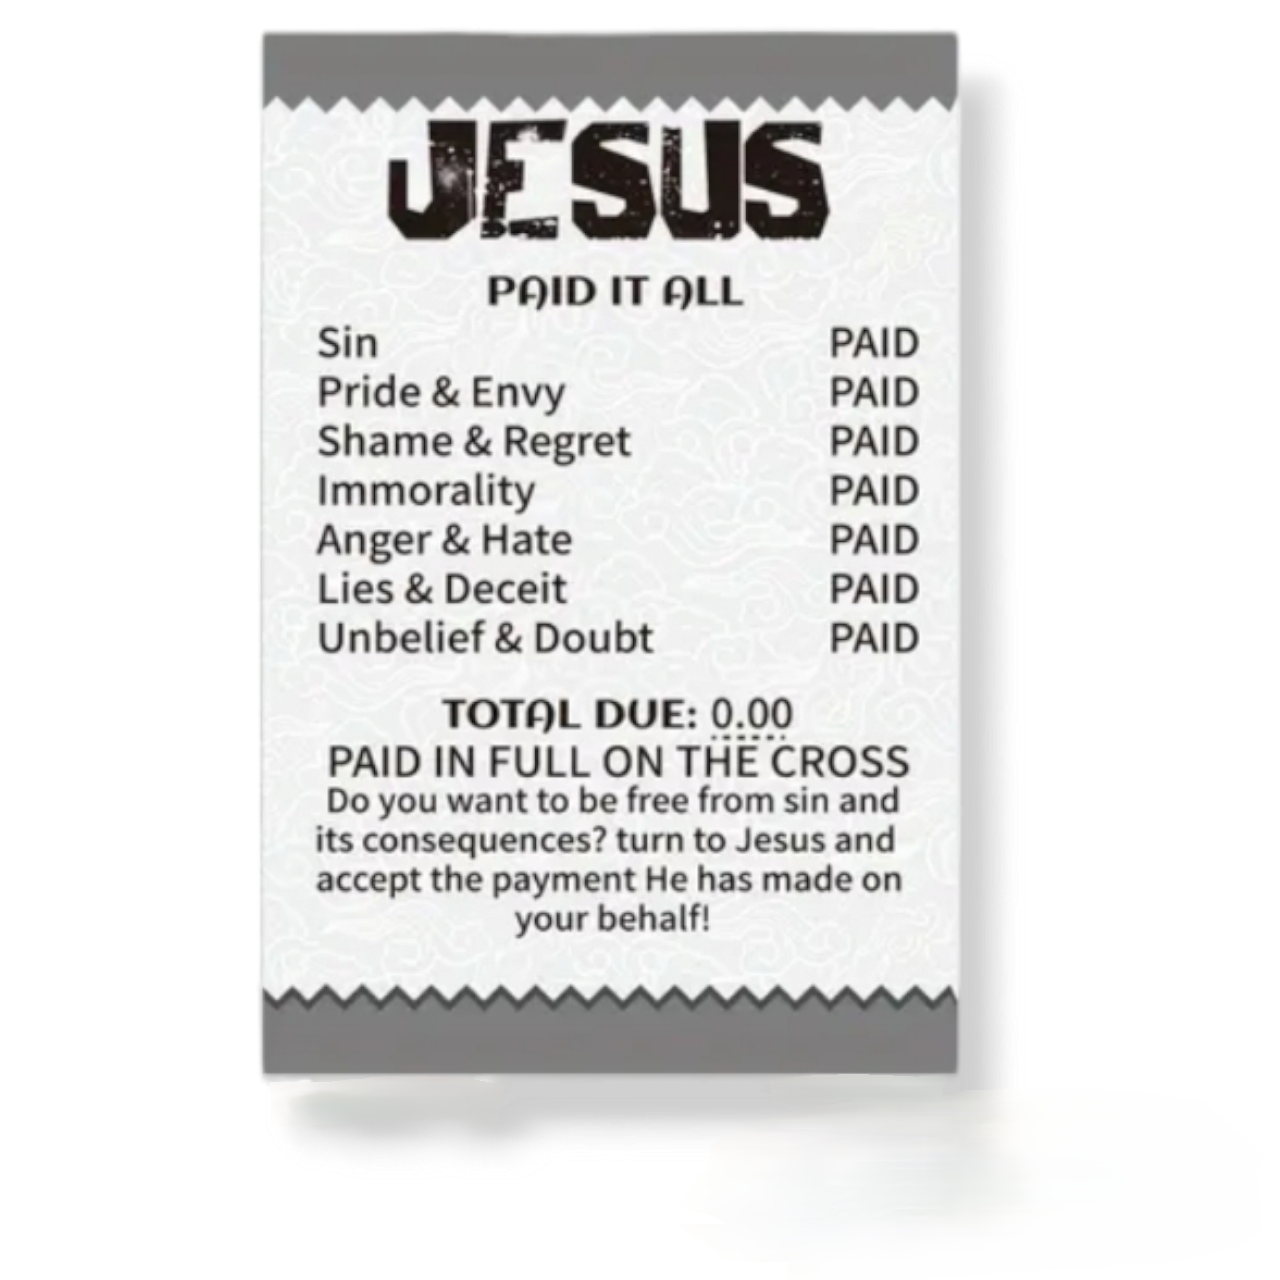 Paid In Full (set of five wallet cards)